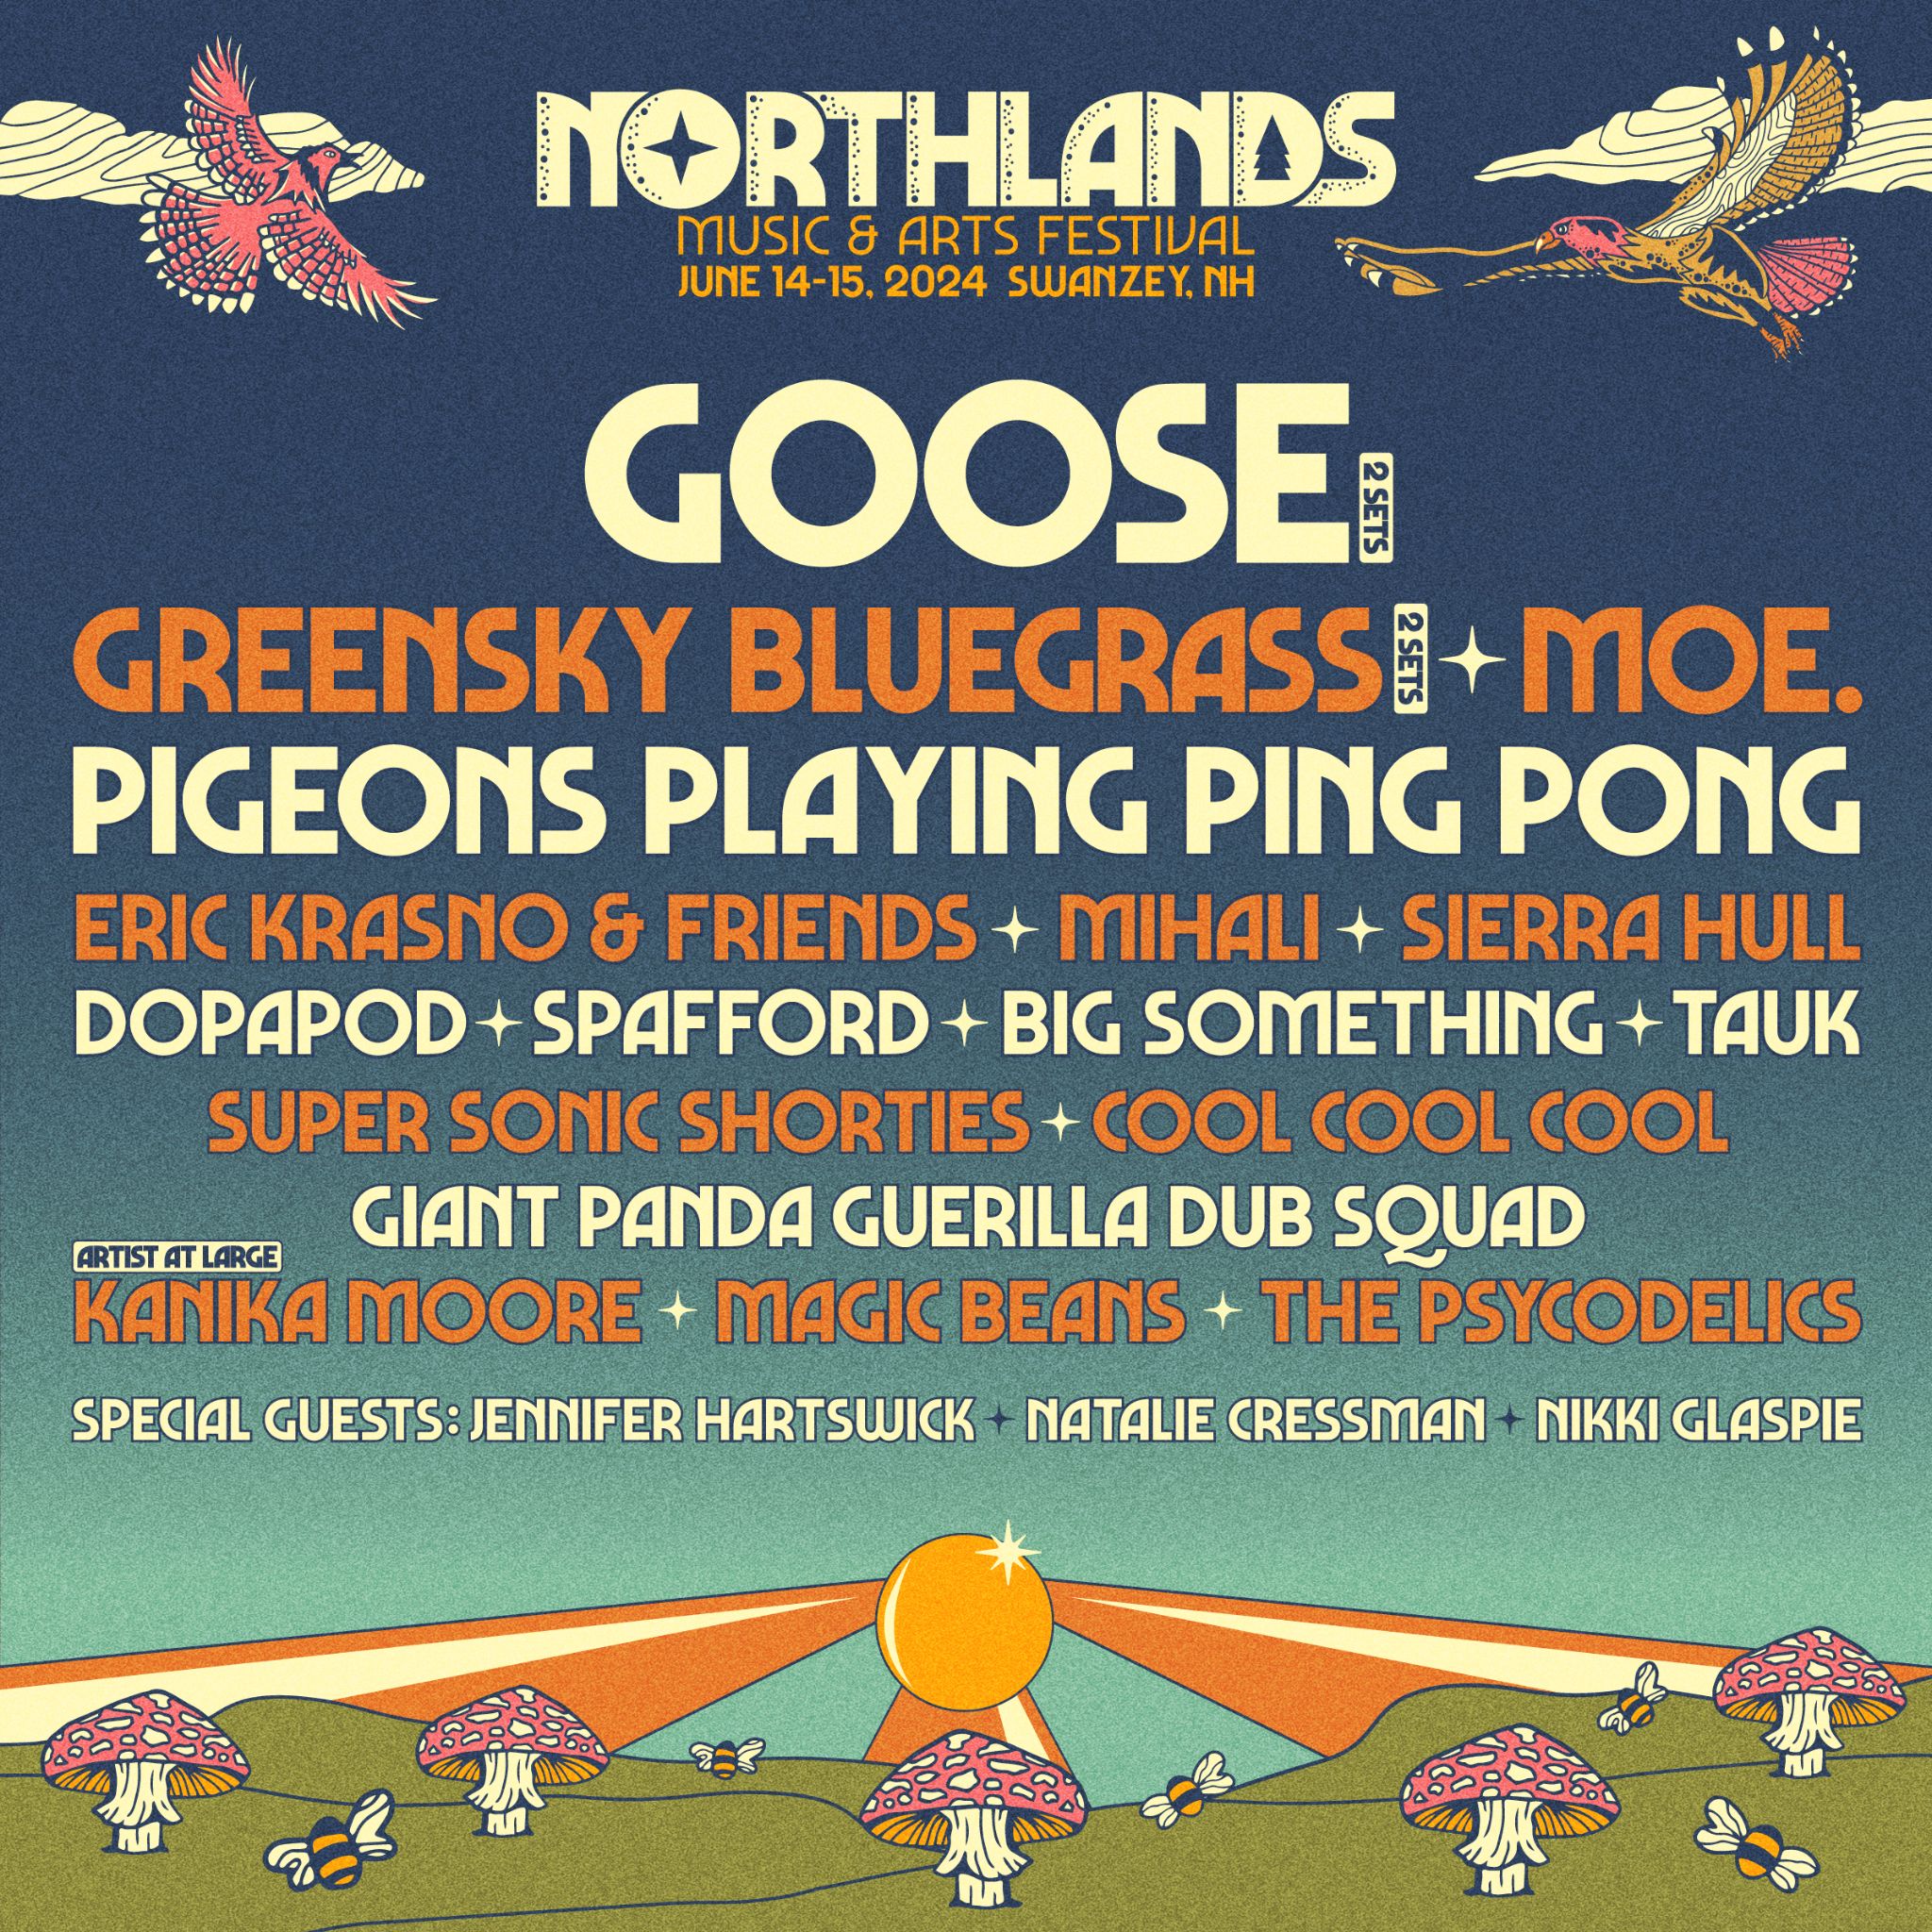 Northlands Music & Arts Festival Adds PPPP, Big Something, and Cool Cool Cool to 2024 Lineup